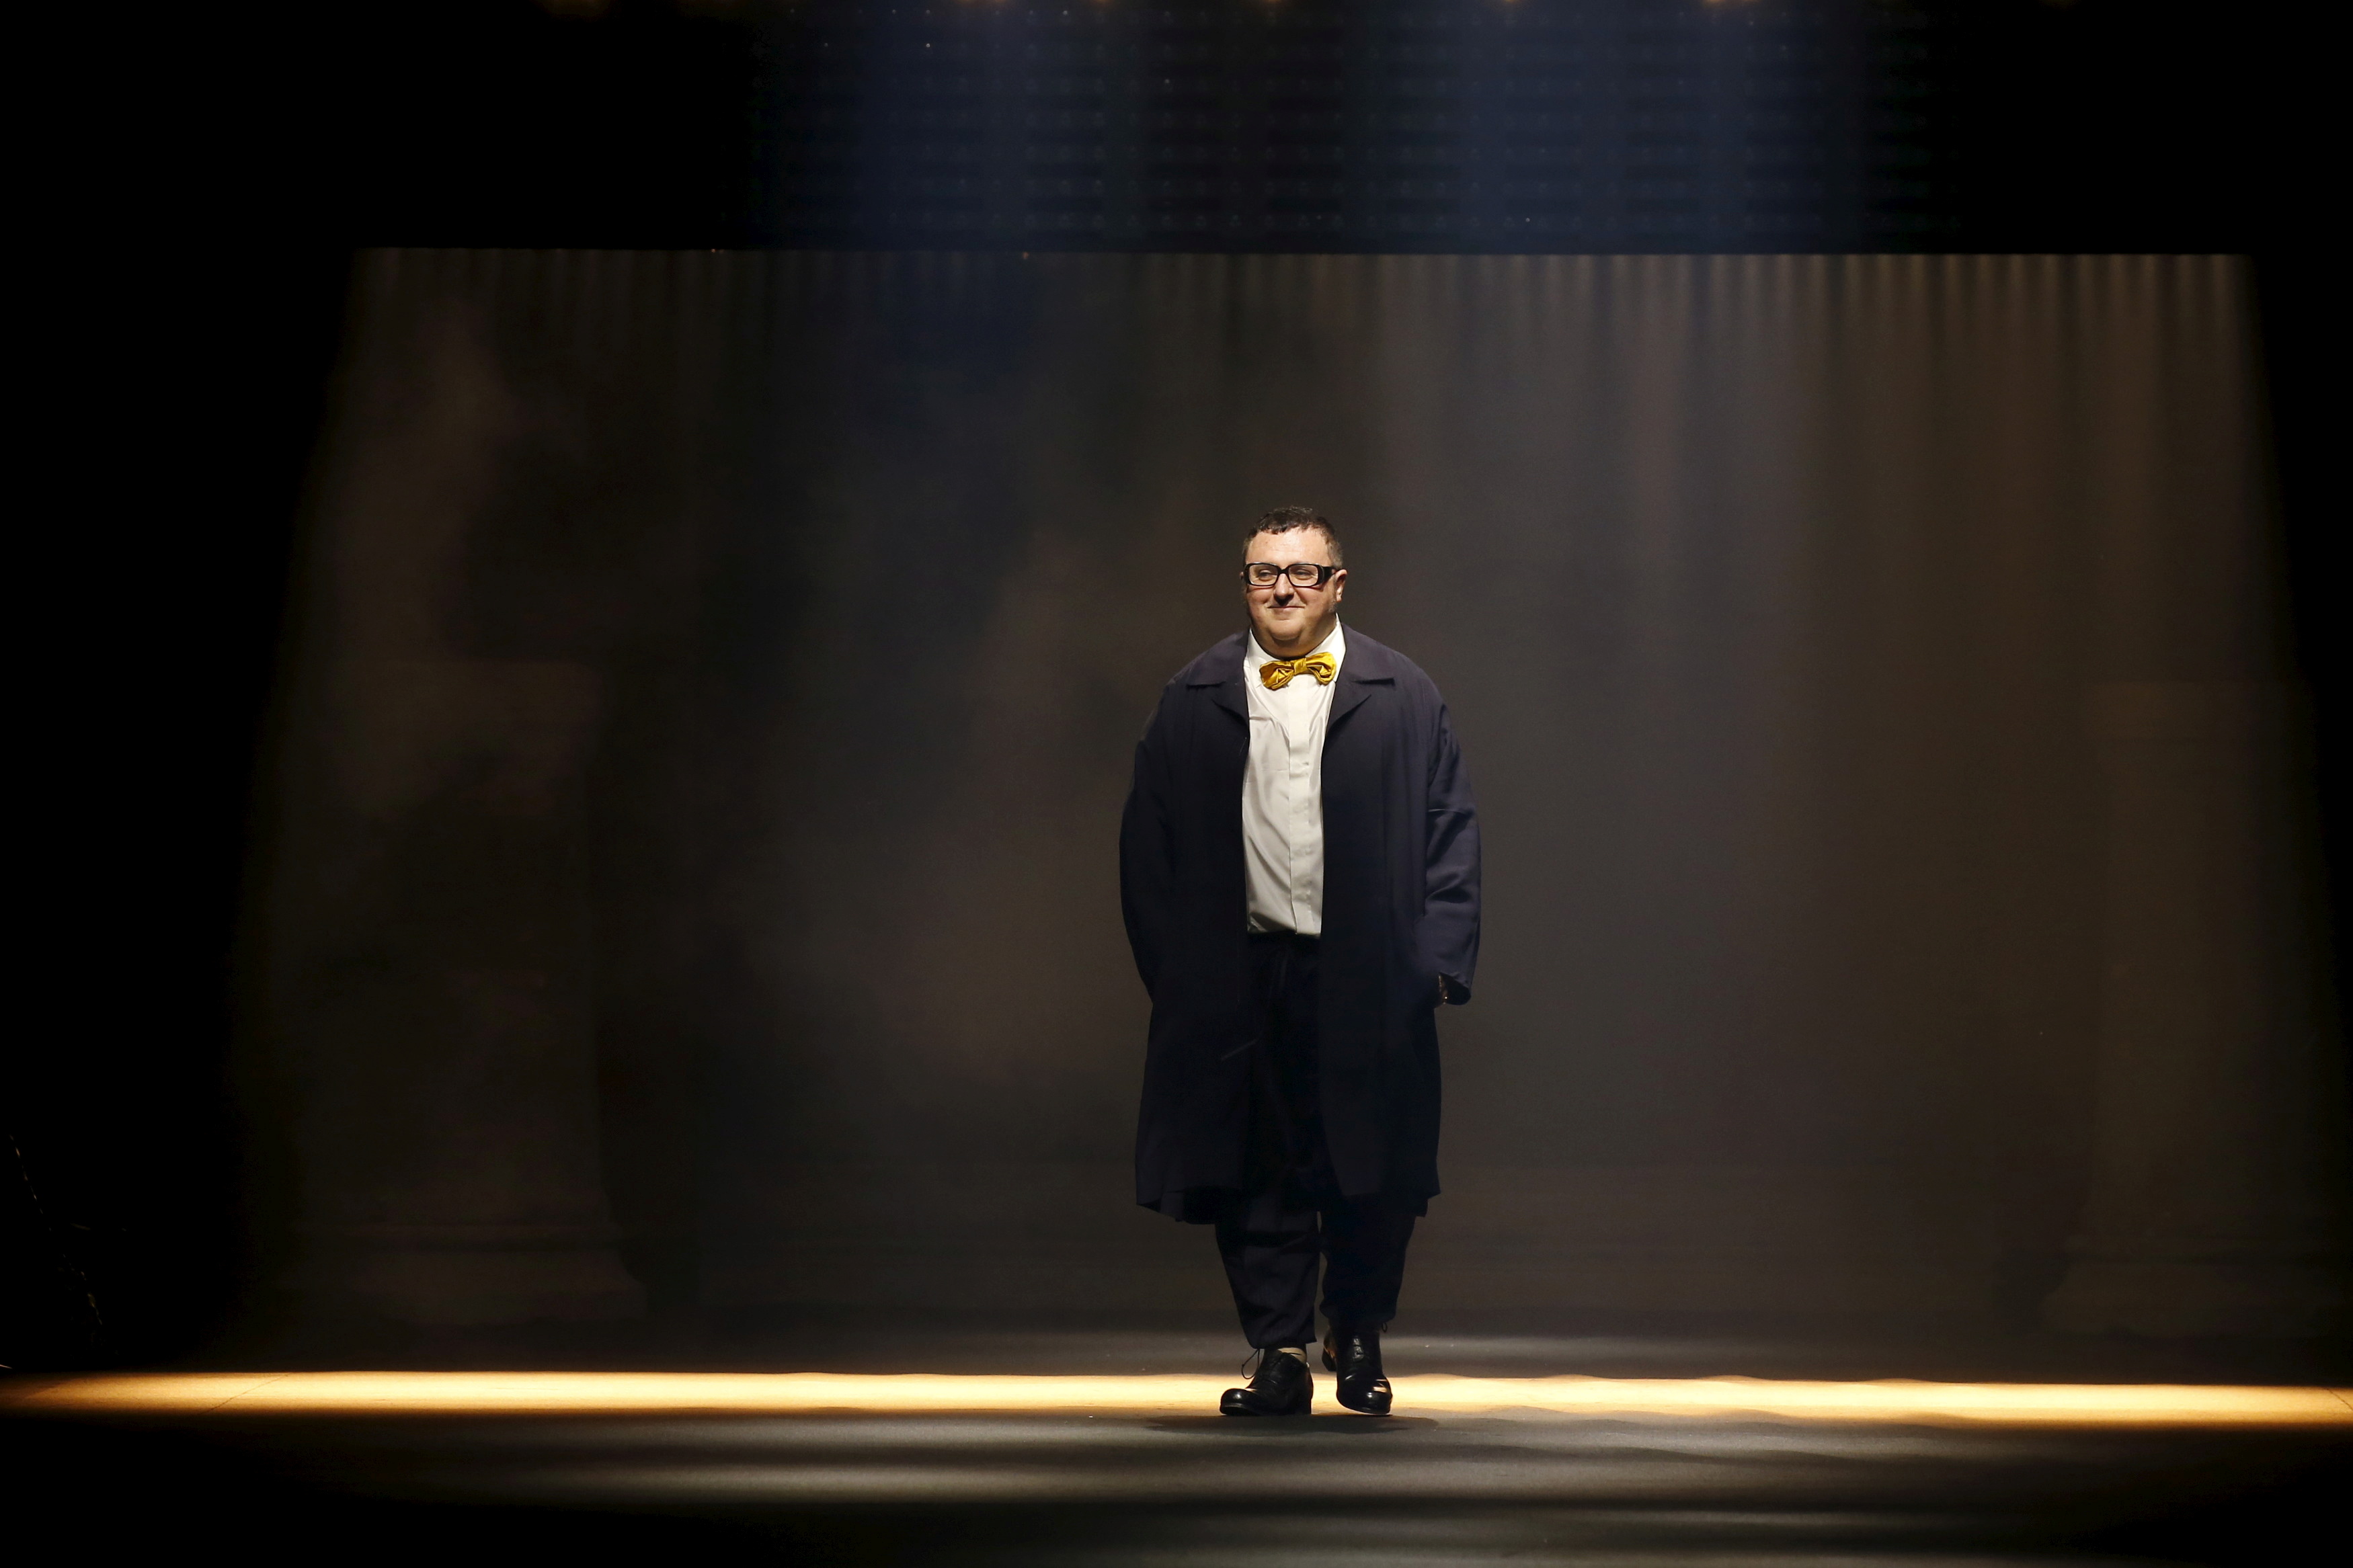 Israeli-American designer Alber Elbaz appears at the end of his Spring/Summer 2016 women's ready-to-wear fashion show for Lanvin in Paris